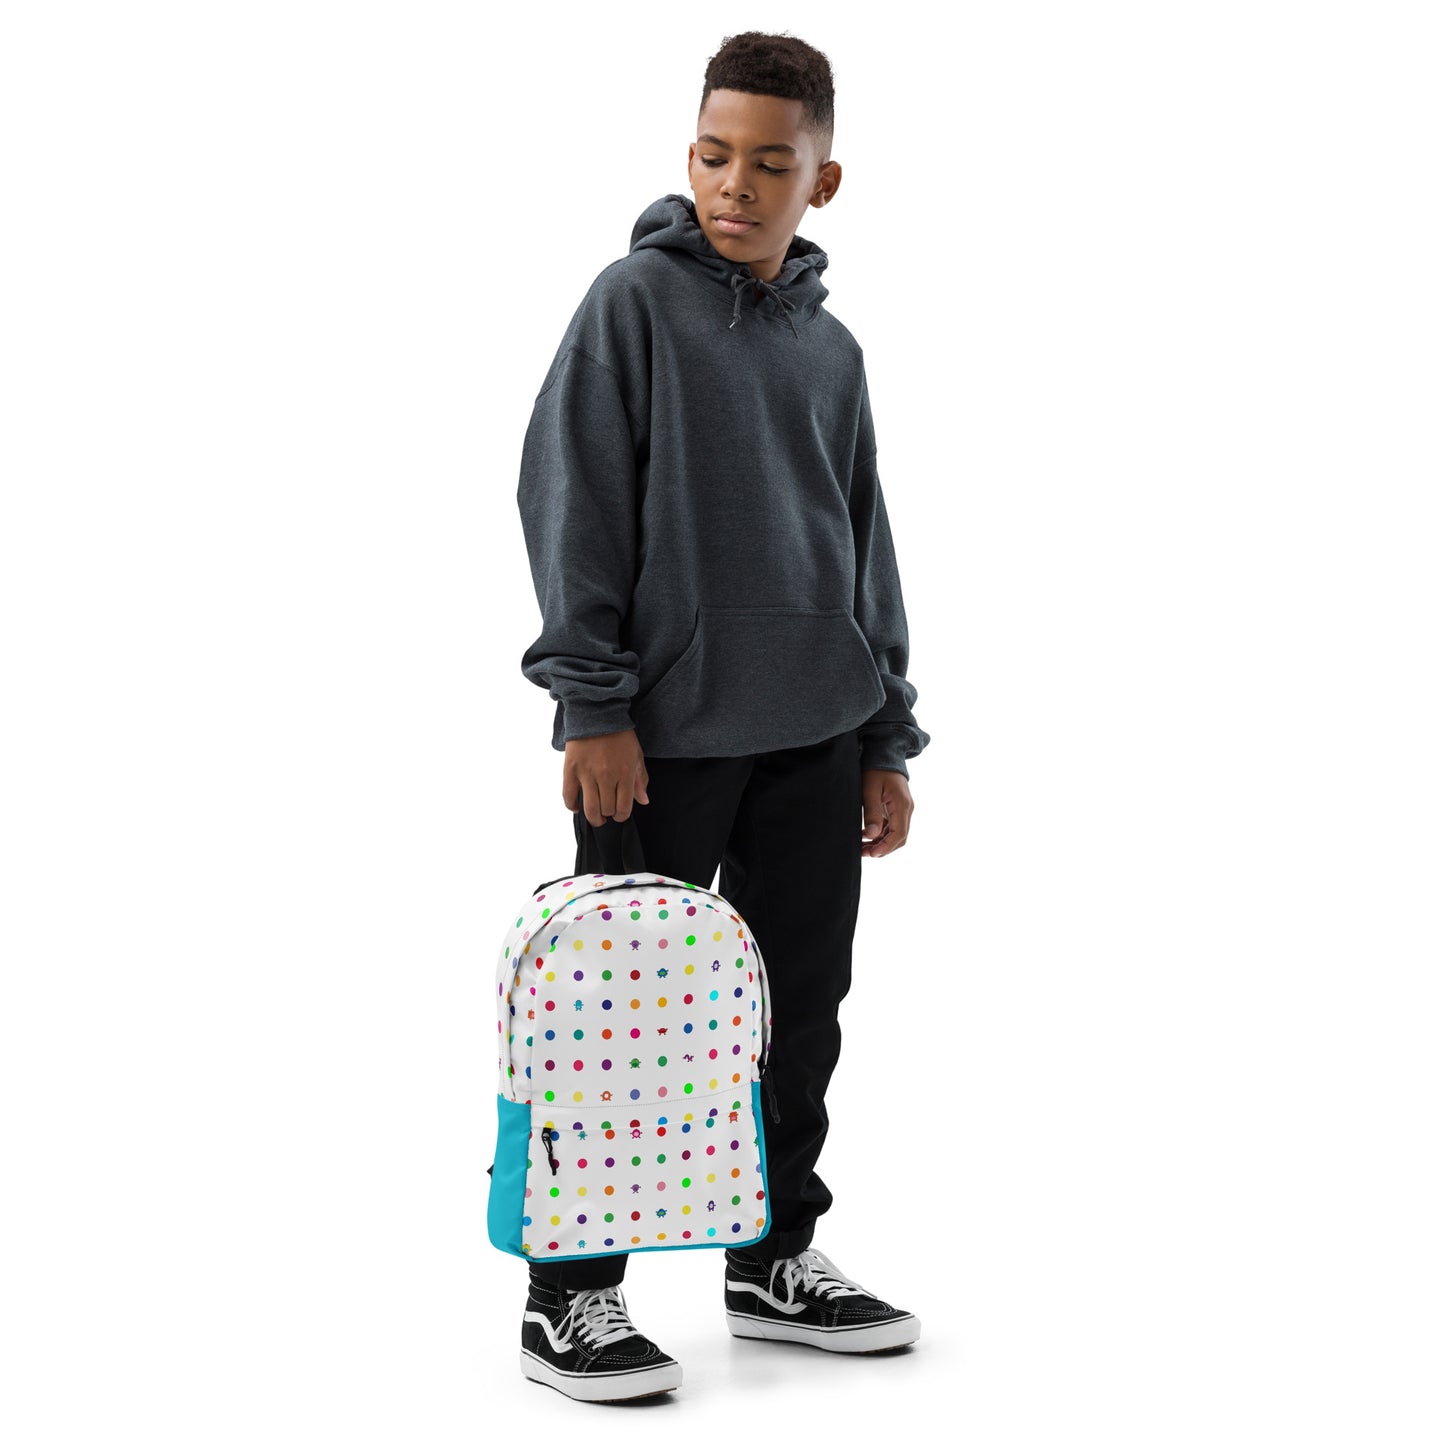 White Turquoise Small Dot Monster Backpack with zip pocket teen boy